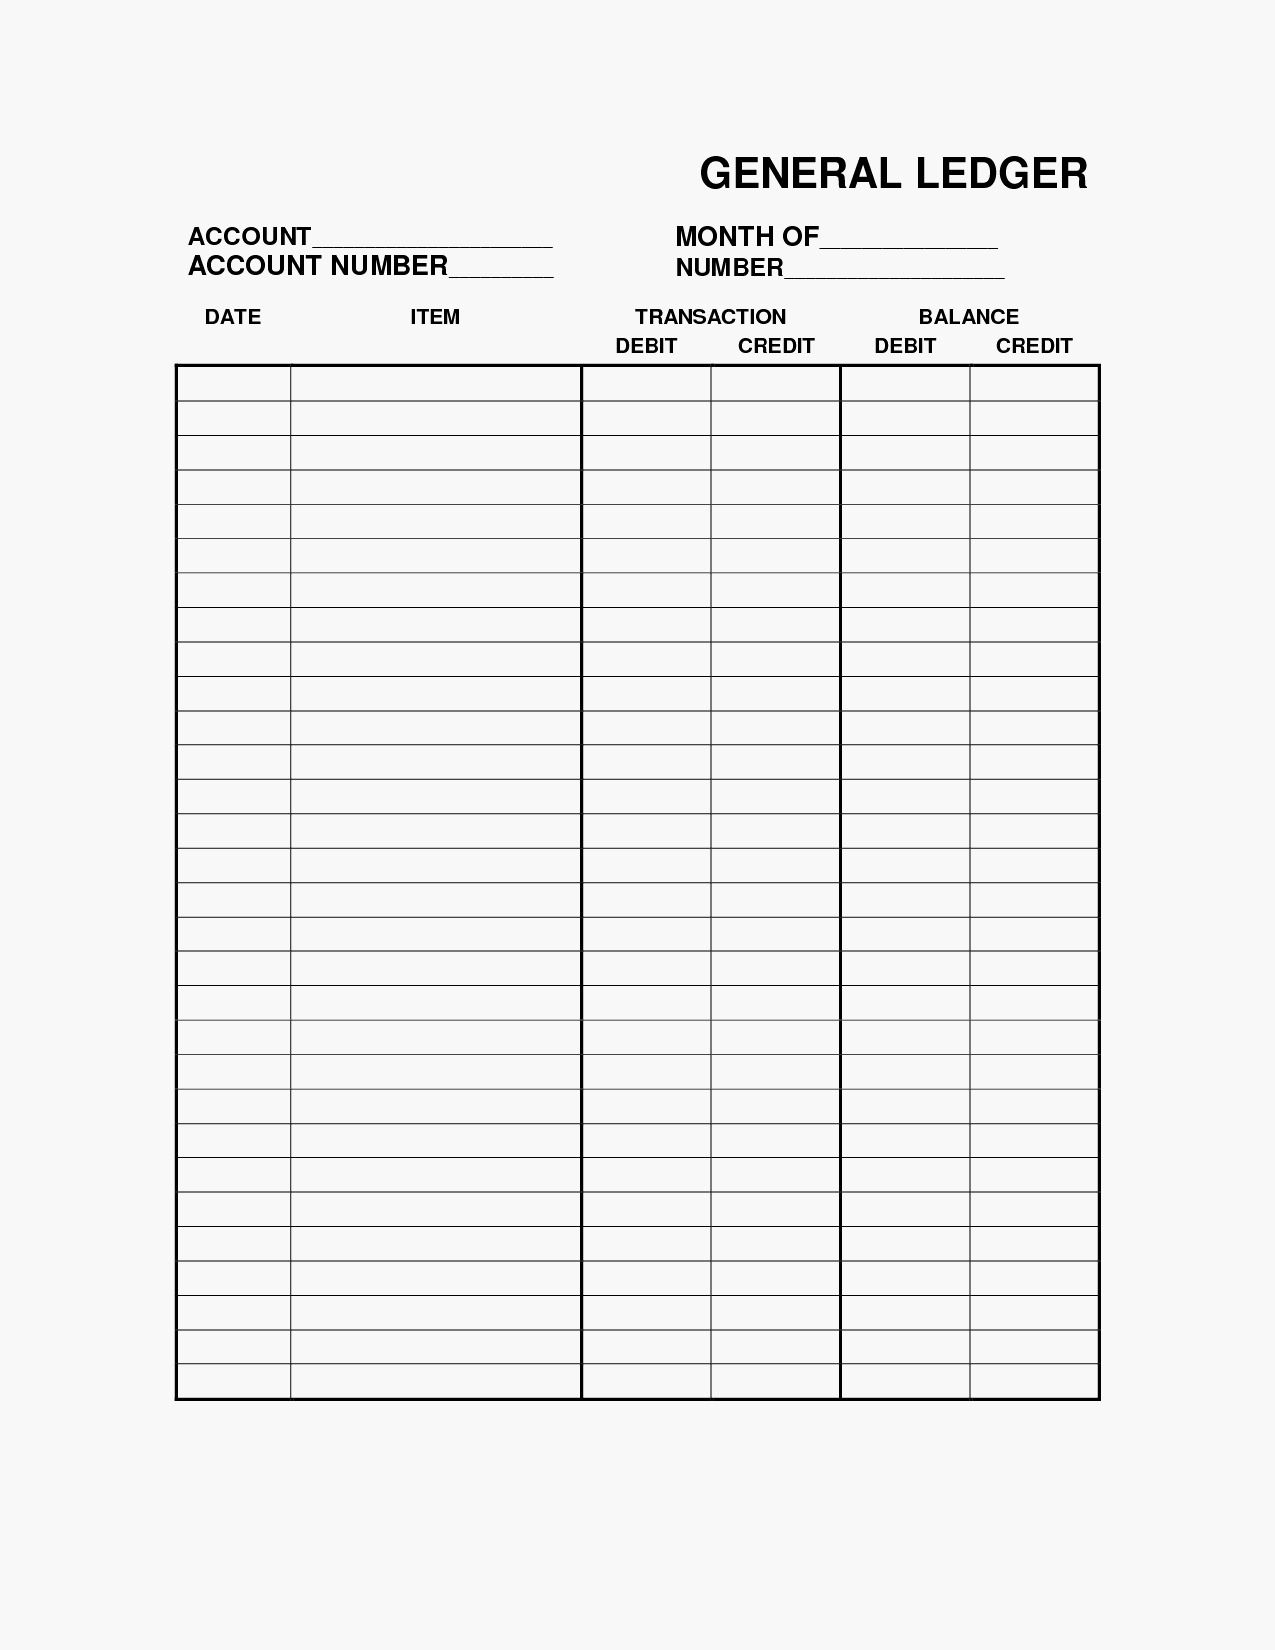 Receipt Tracking Spreadsheet Throughout Expense Tracker Excel Template Glendale Community